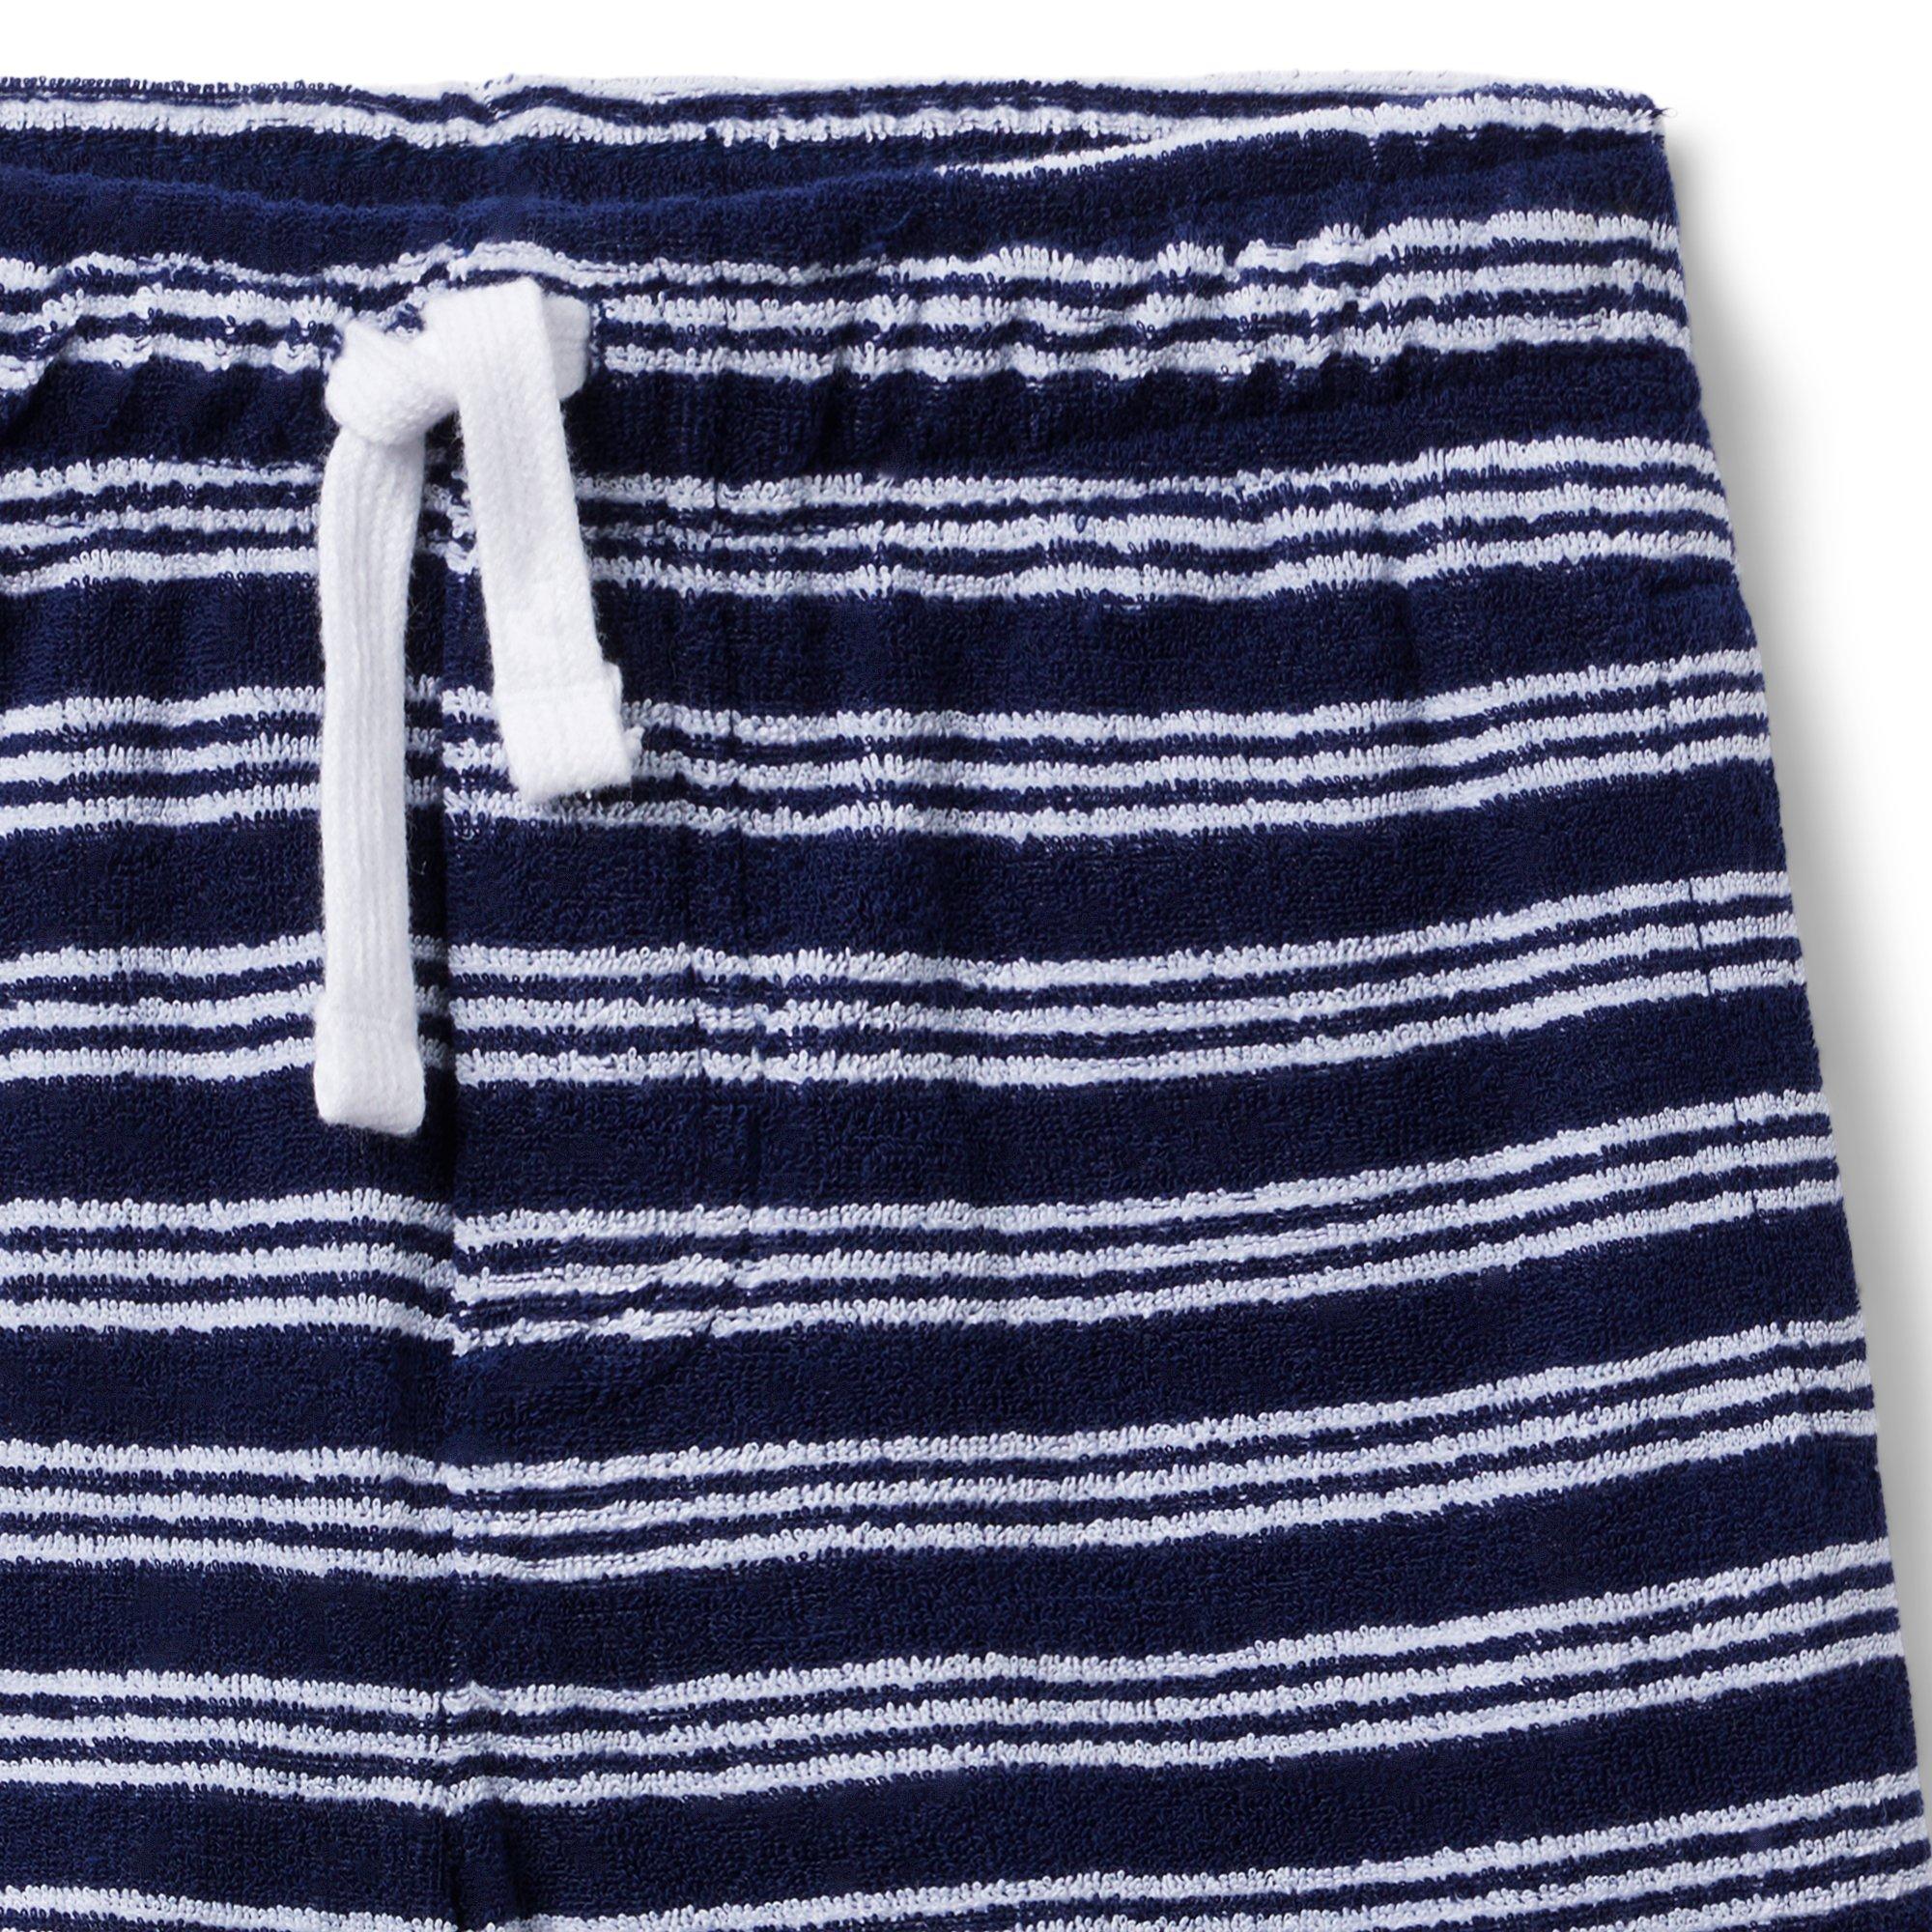 Striped Terry Pull-On Short